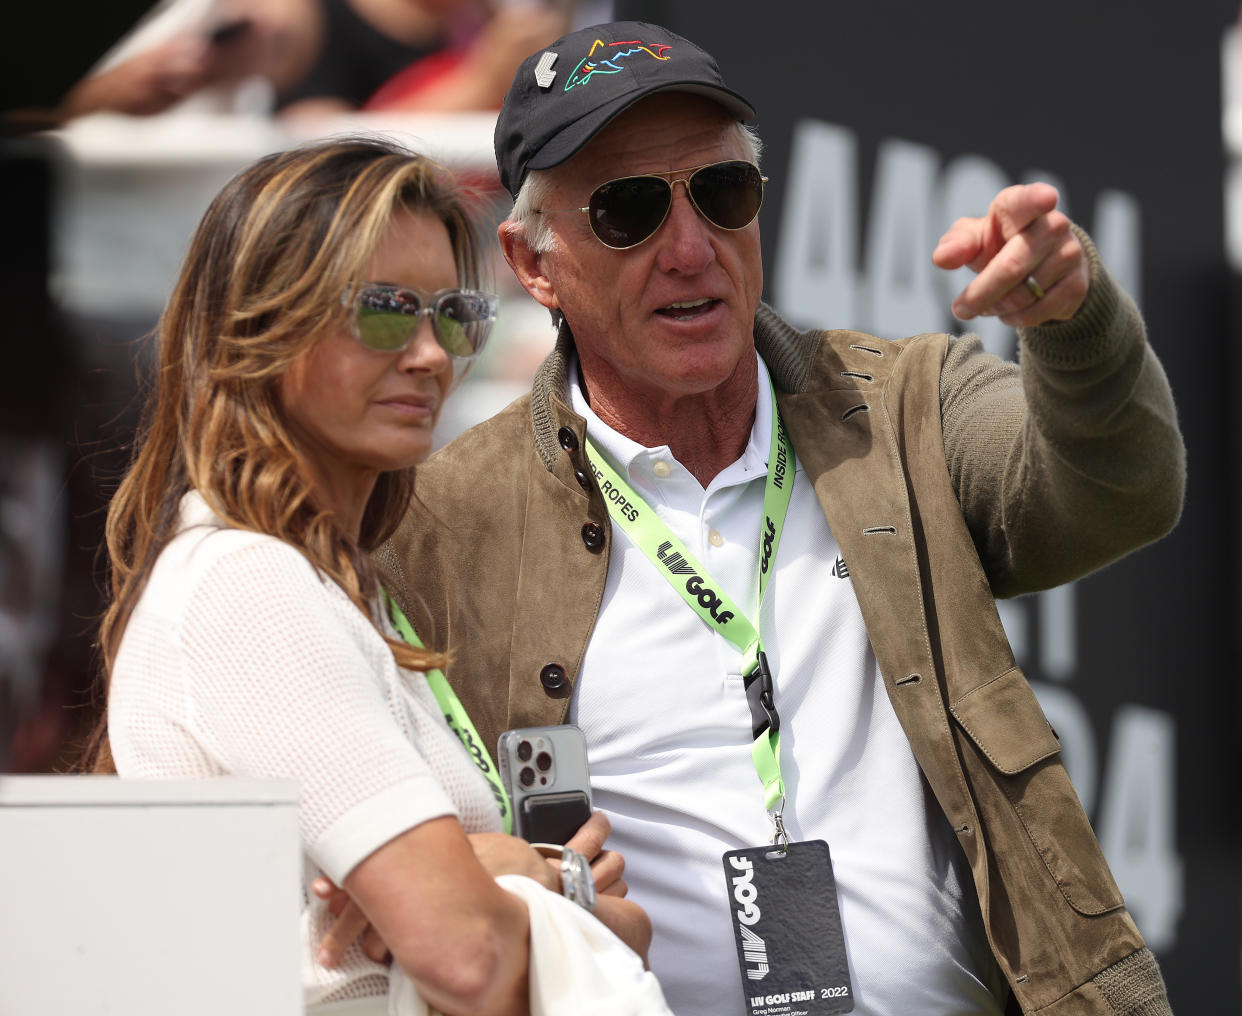 LIV Golf CEO Greg Norman pictured with his wife Kirsten Kutner